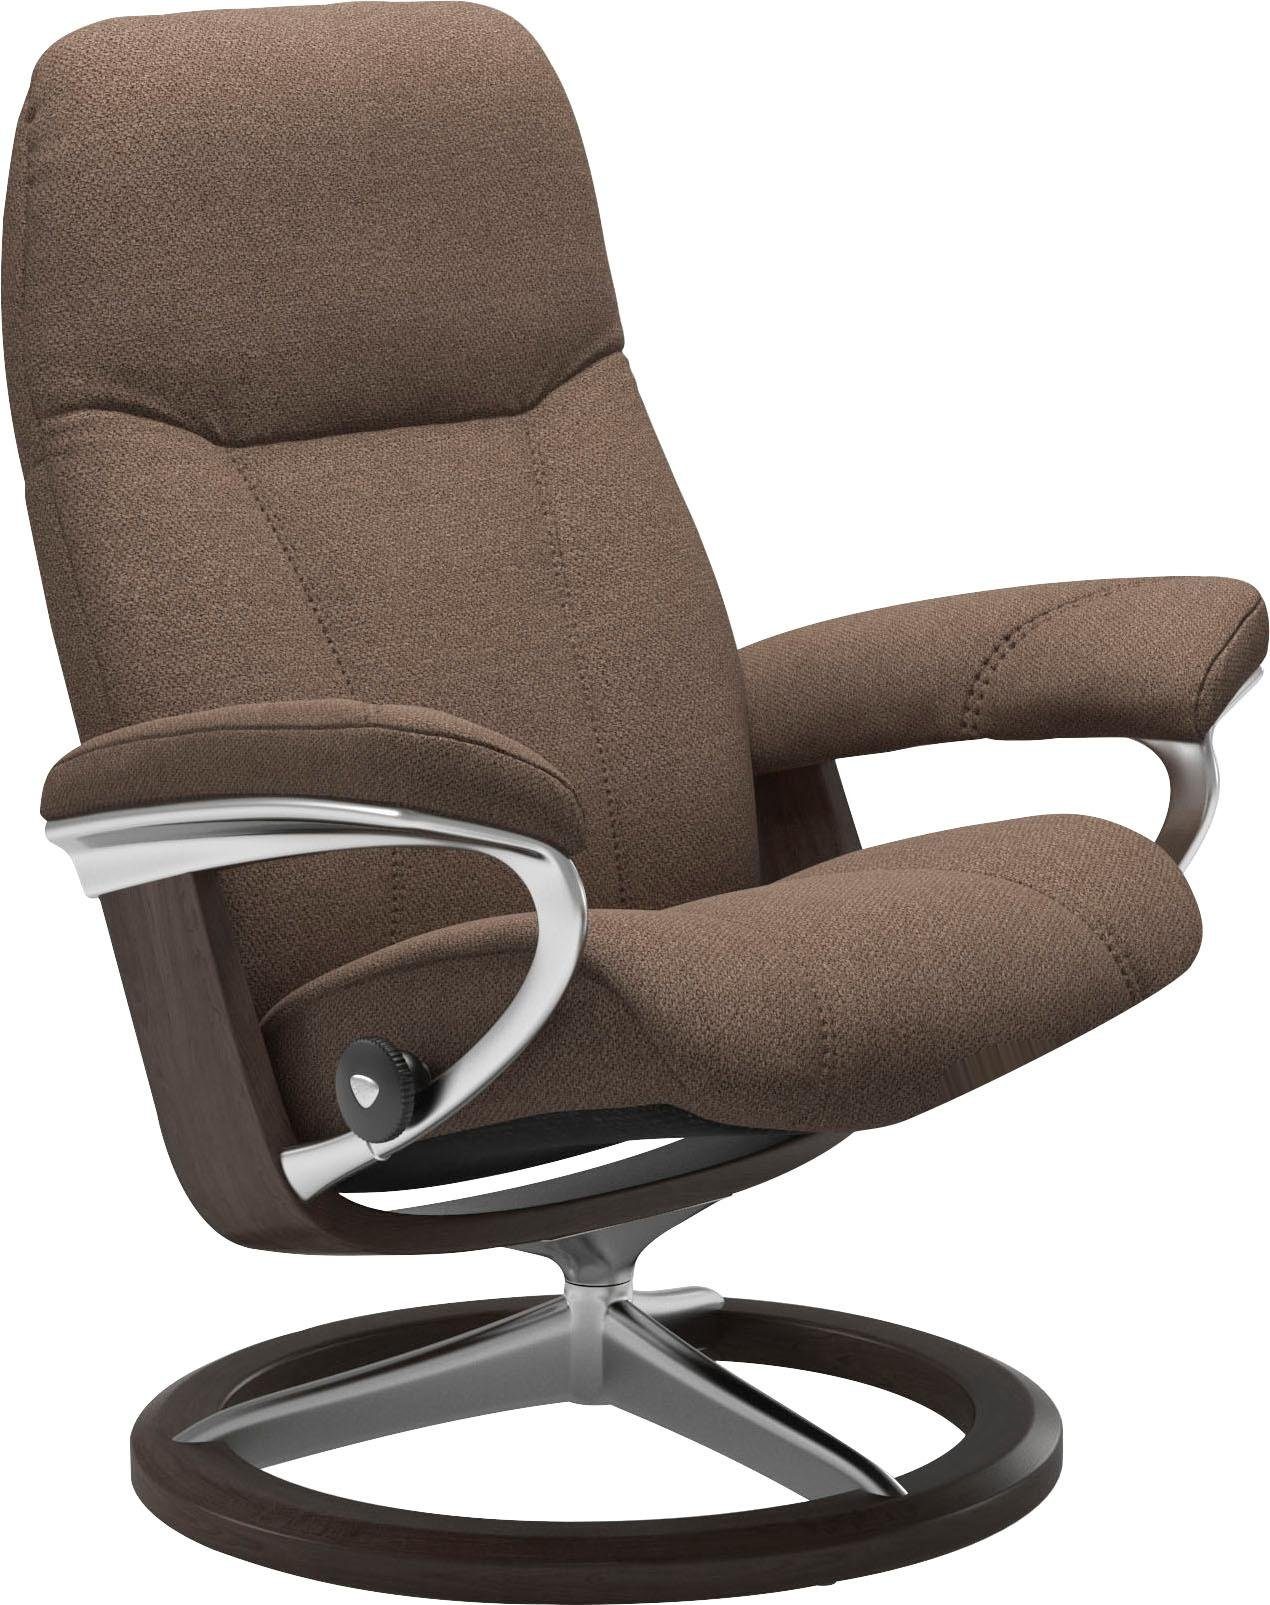 Stressless® Relaxsessel Consul, Signature L, Größe Wenge mit Base, Gestell